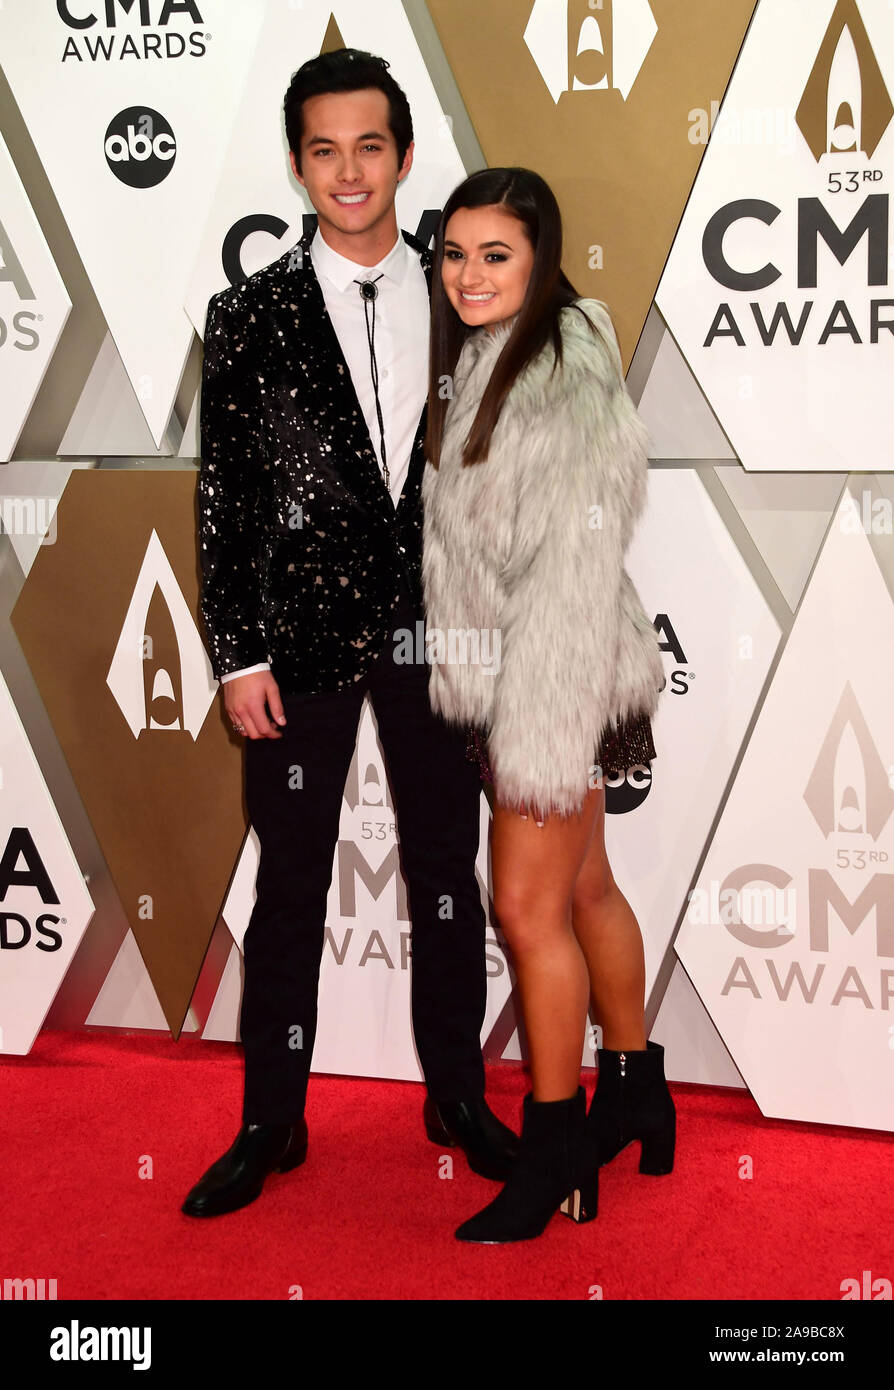 13 November 2019 - Nashville, Tennessee - Laine Hardy, Sydney Becnel. 53rd Annual CMA Awards, Country Music's Biggest Night, held at Music City Center. Photo Credit: Laura Farr/AdMedia /MediaPunch Stock Photo